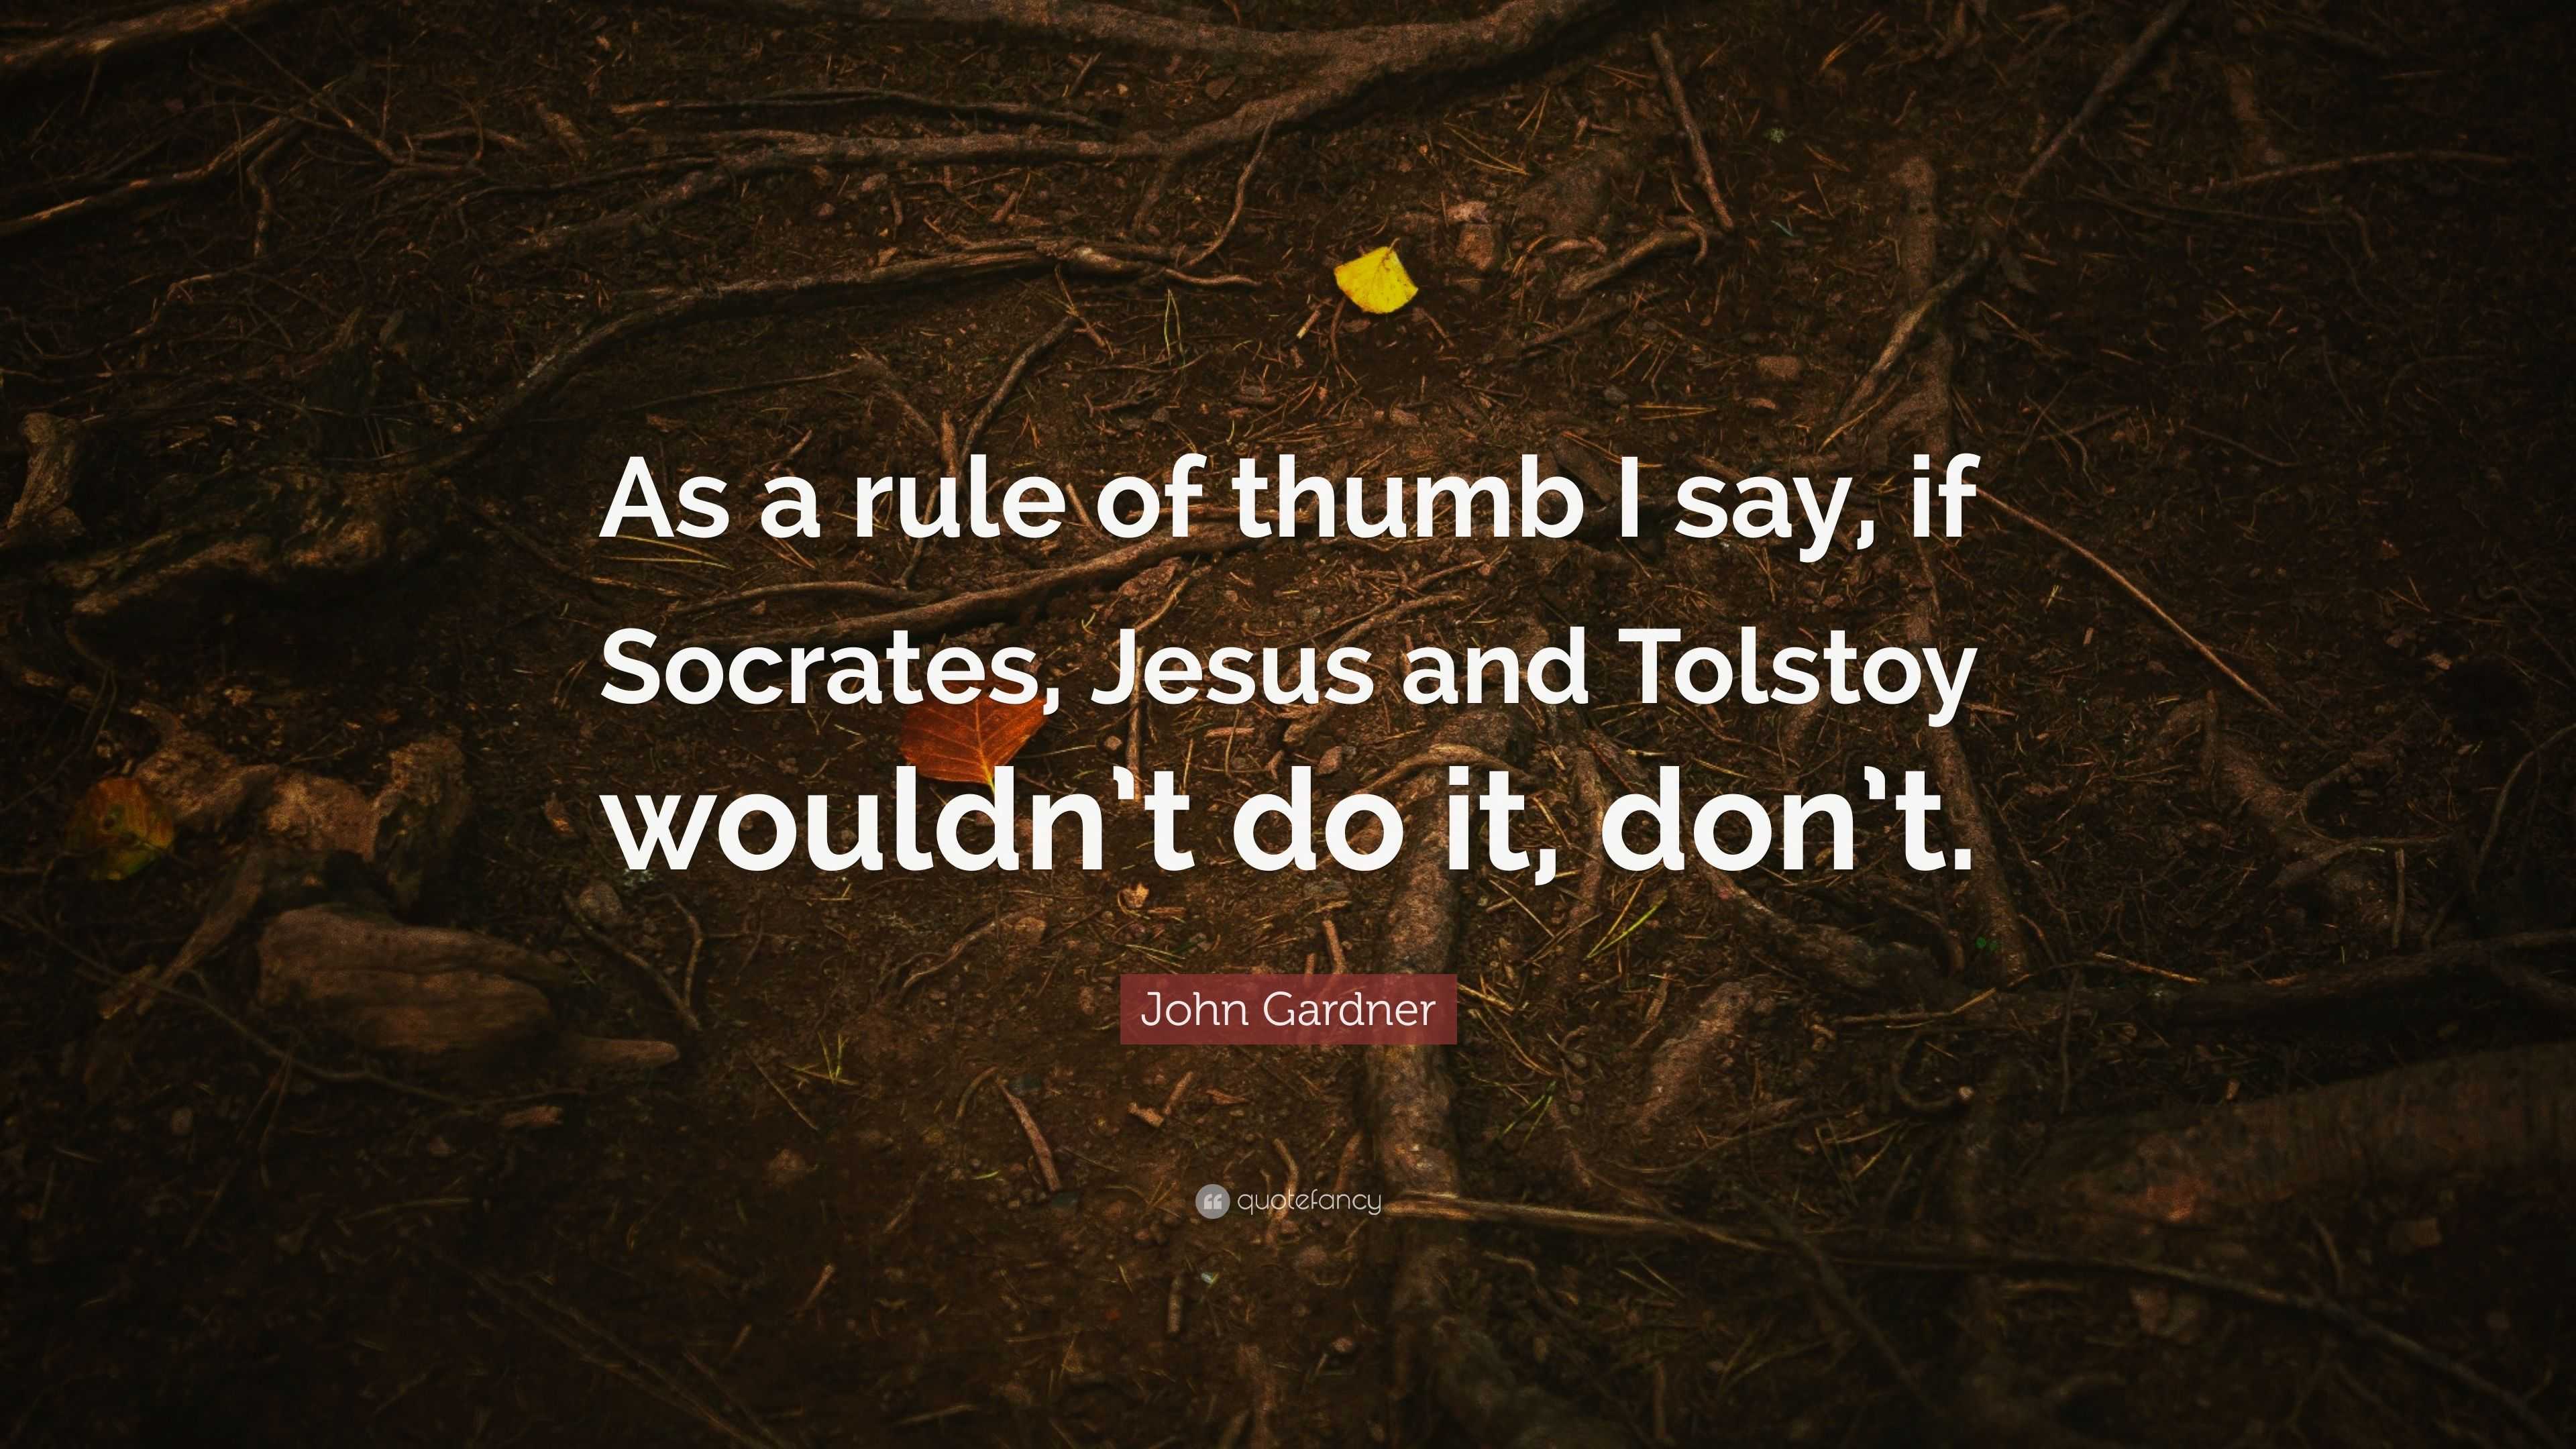 John Gardner Quote: "As a rule of thumb I say, if Socrates, Jesus and Tolstoy wouldn't do it ...